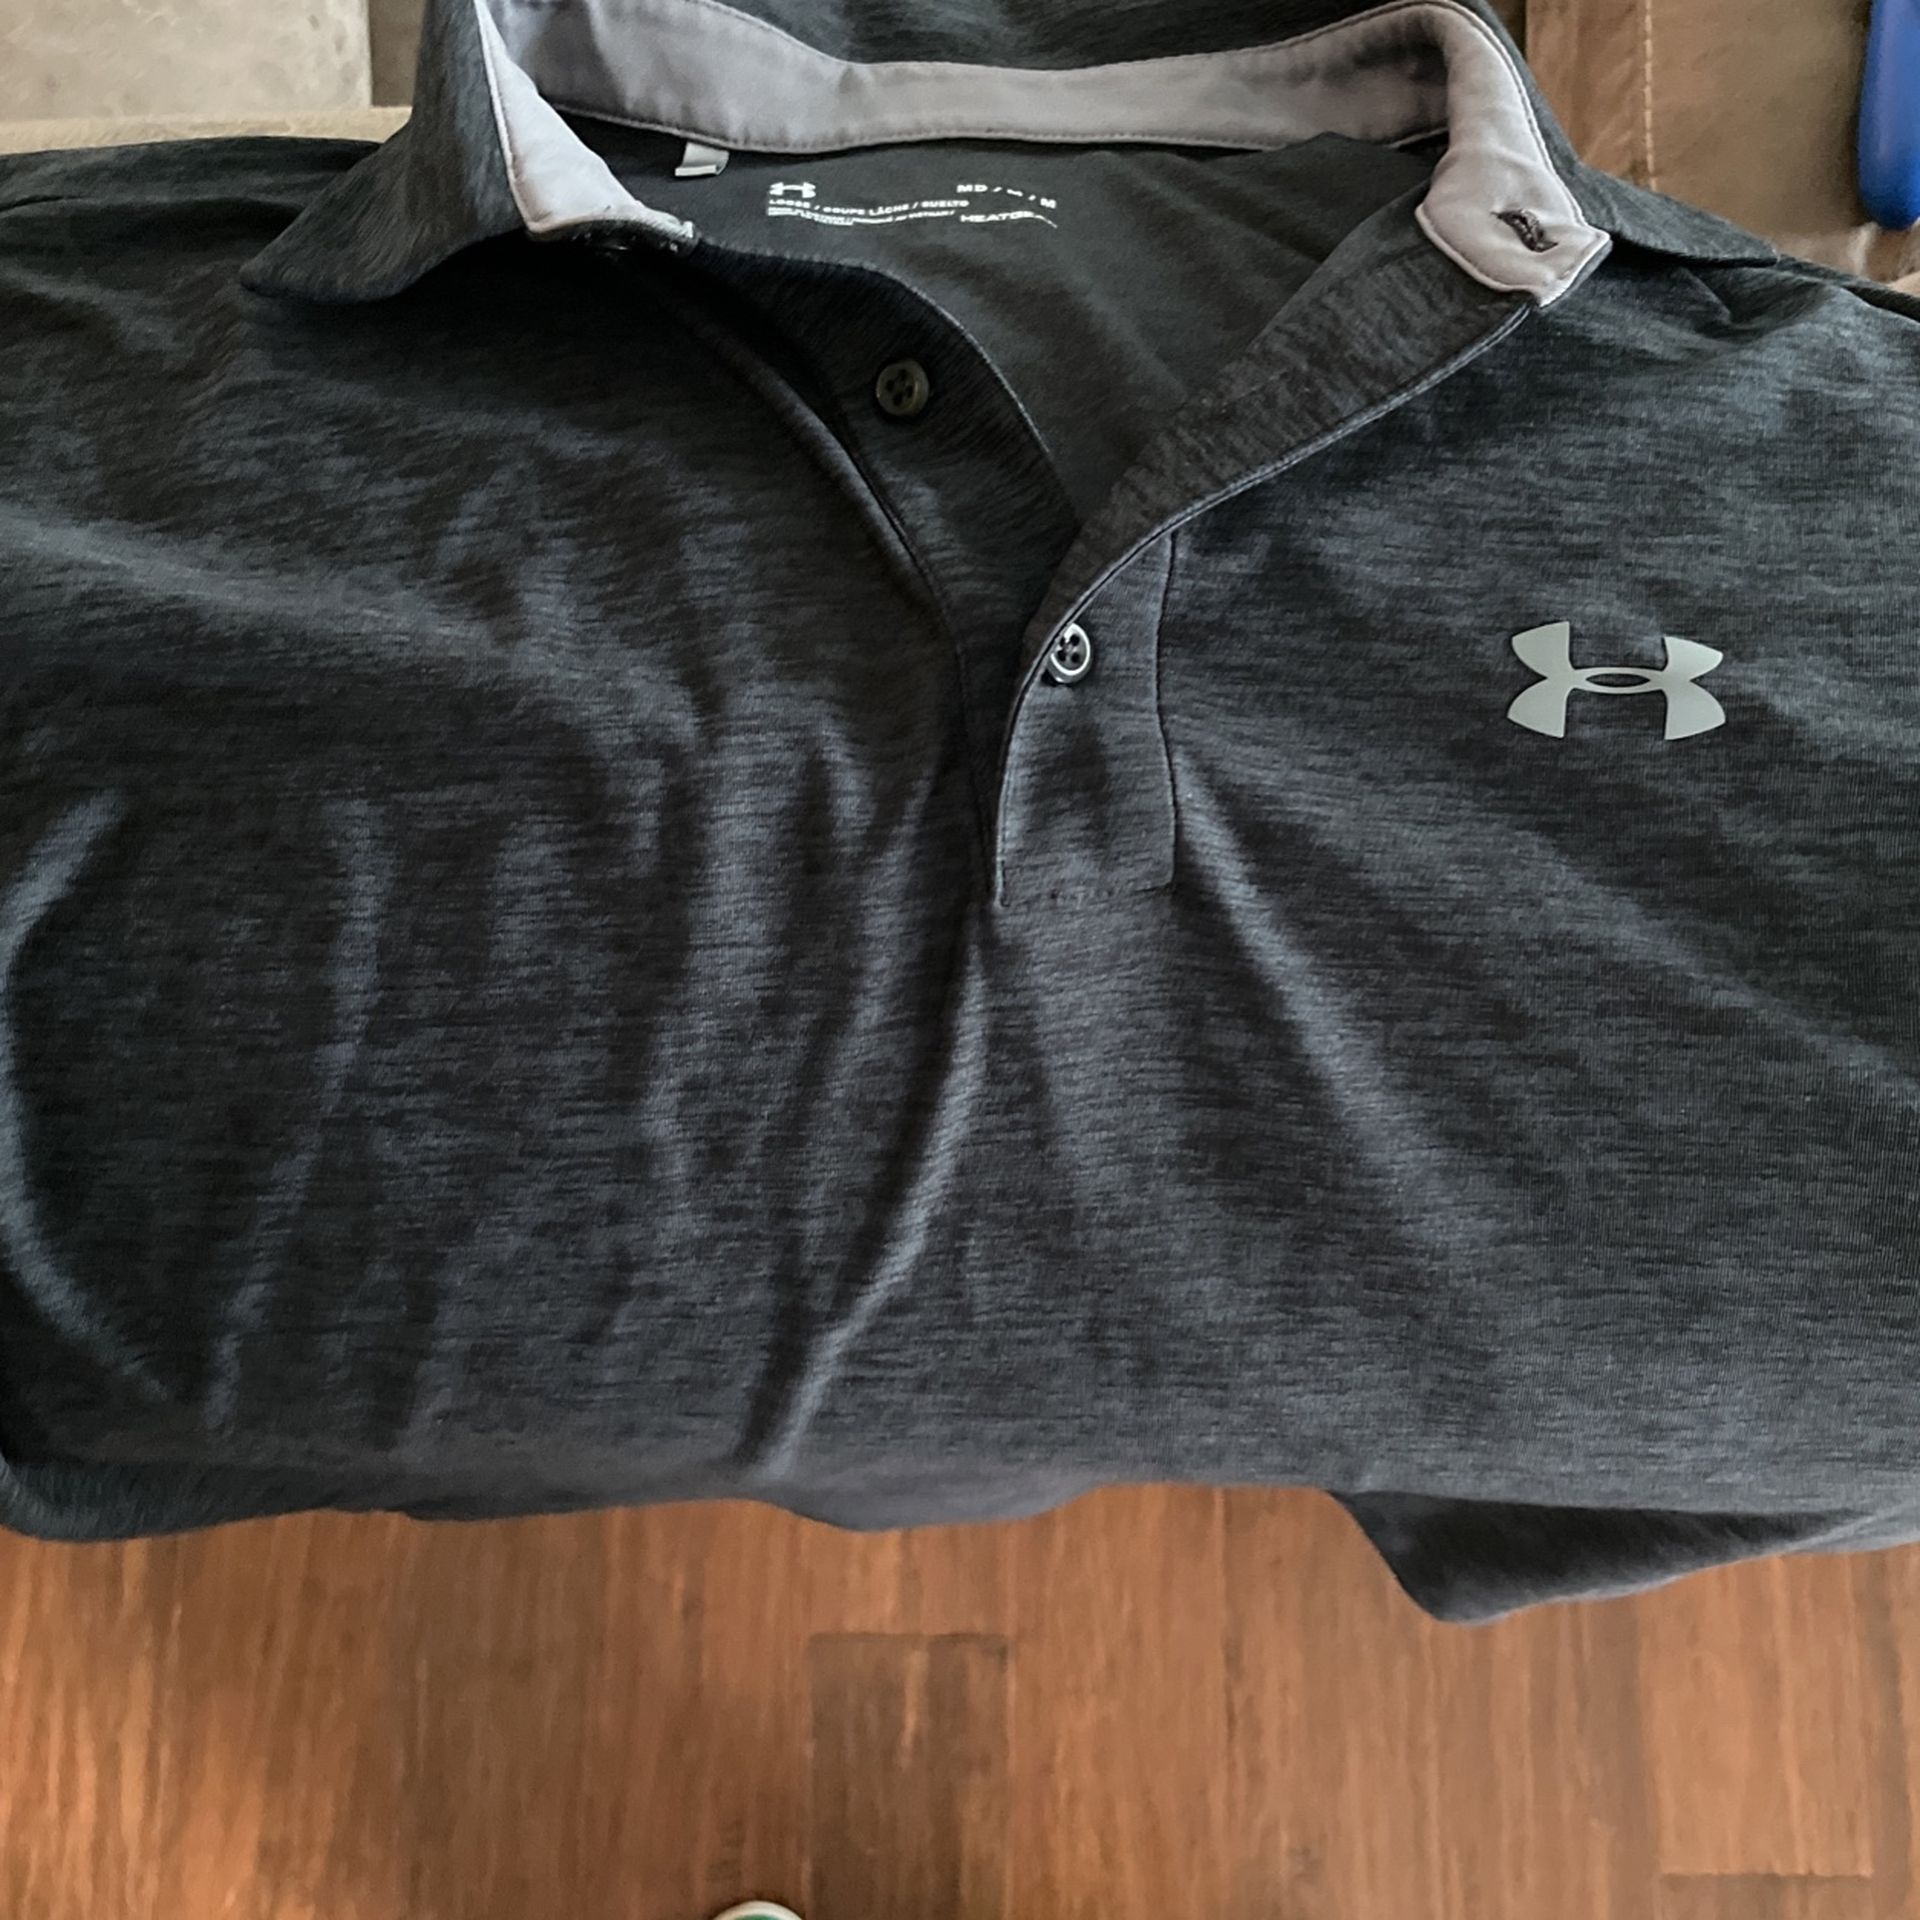 Under Armour Shirts 